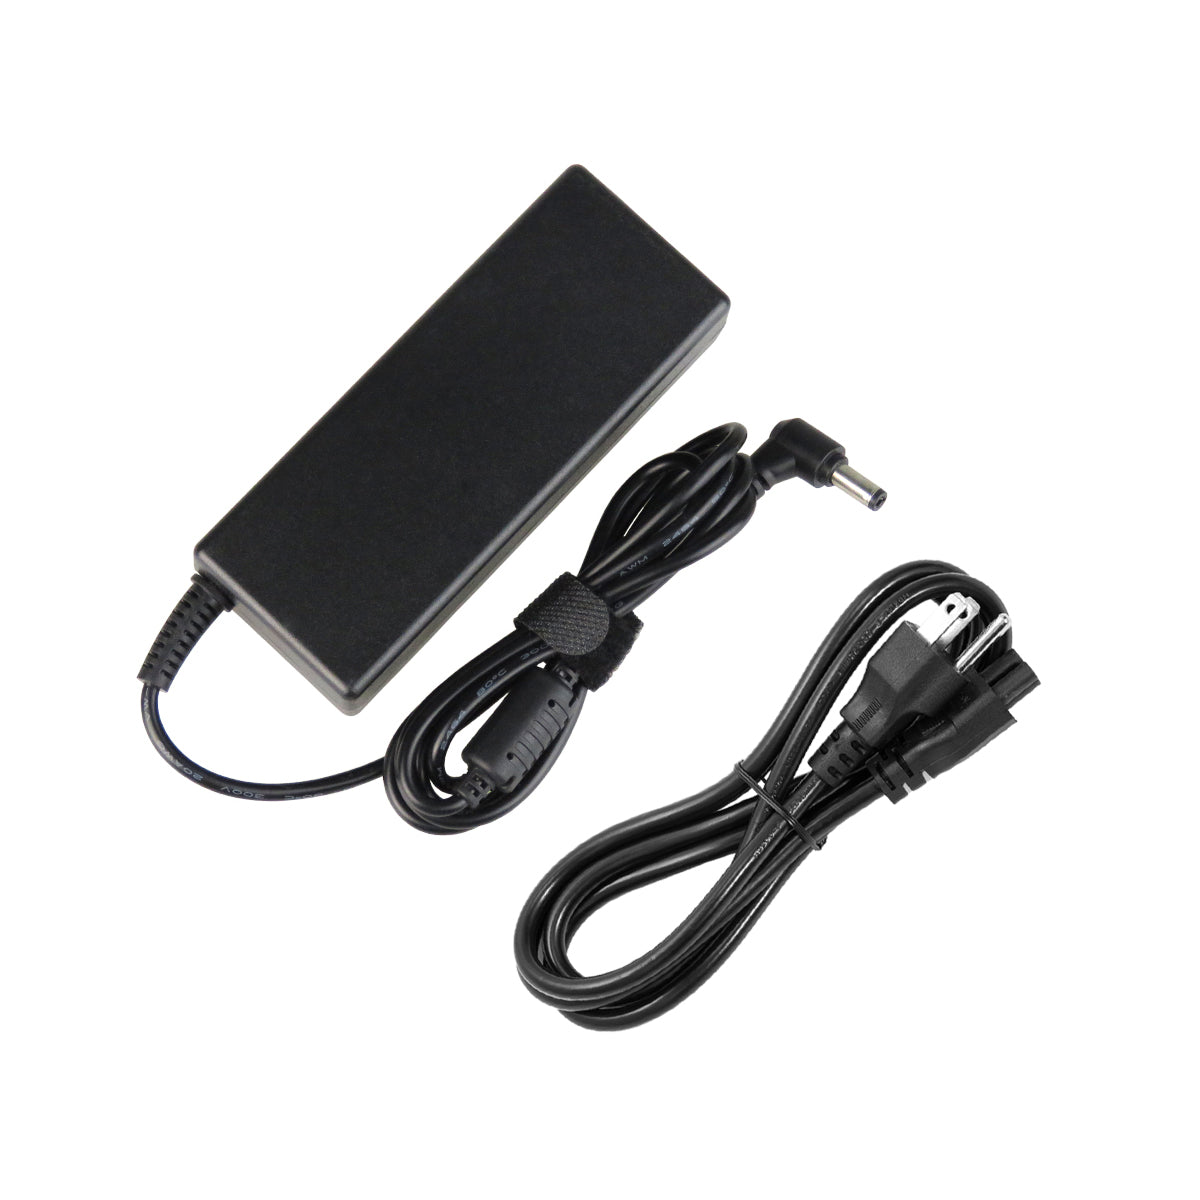 AC Adapter Charger for ASUS X75vd Notebook.